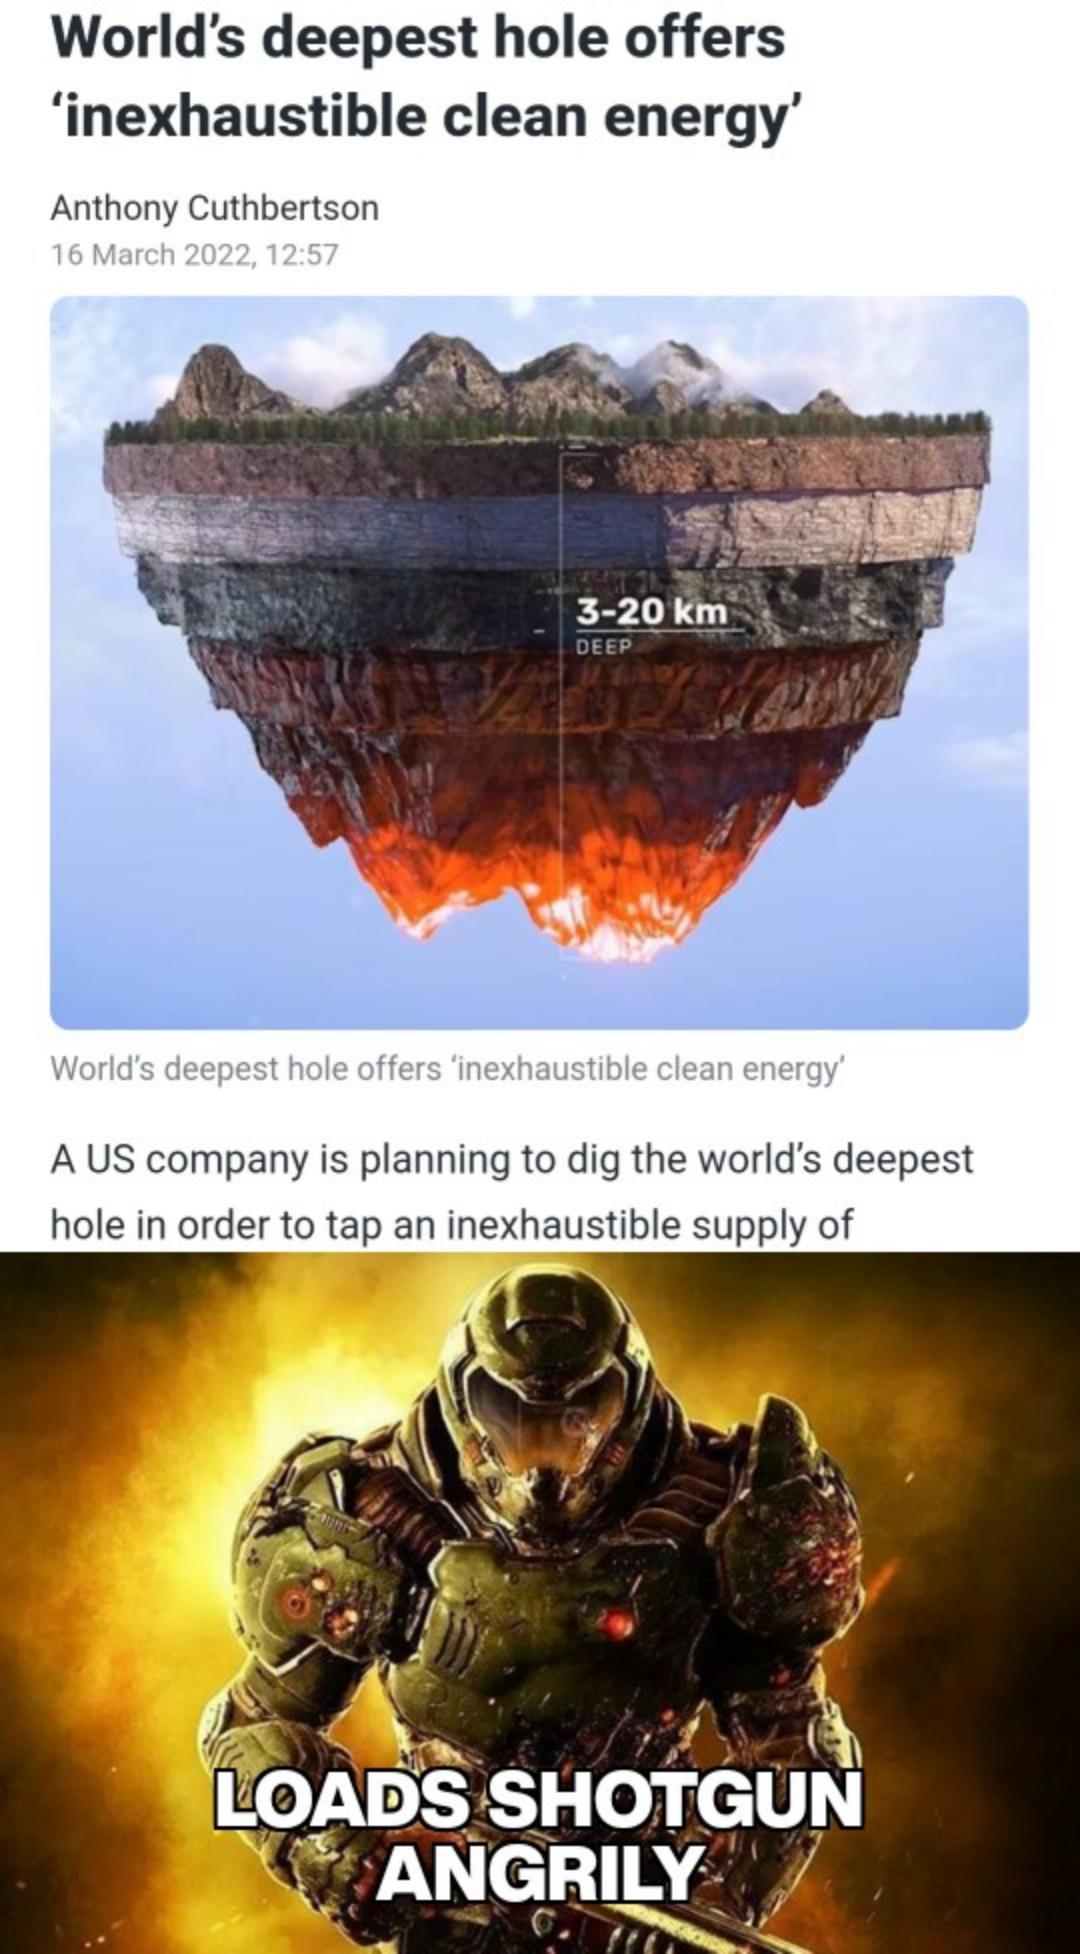 dank memes - funny memes - Geothermal energy - World's deepest hole offers 'inexhaustible clean energy Anthony Cuthbertson , 320 km Deep World's disepest hole offers exhaustible clean energy A Us company is planning to dig the world's deepest hole in orde